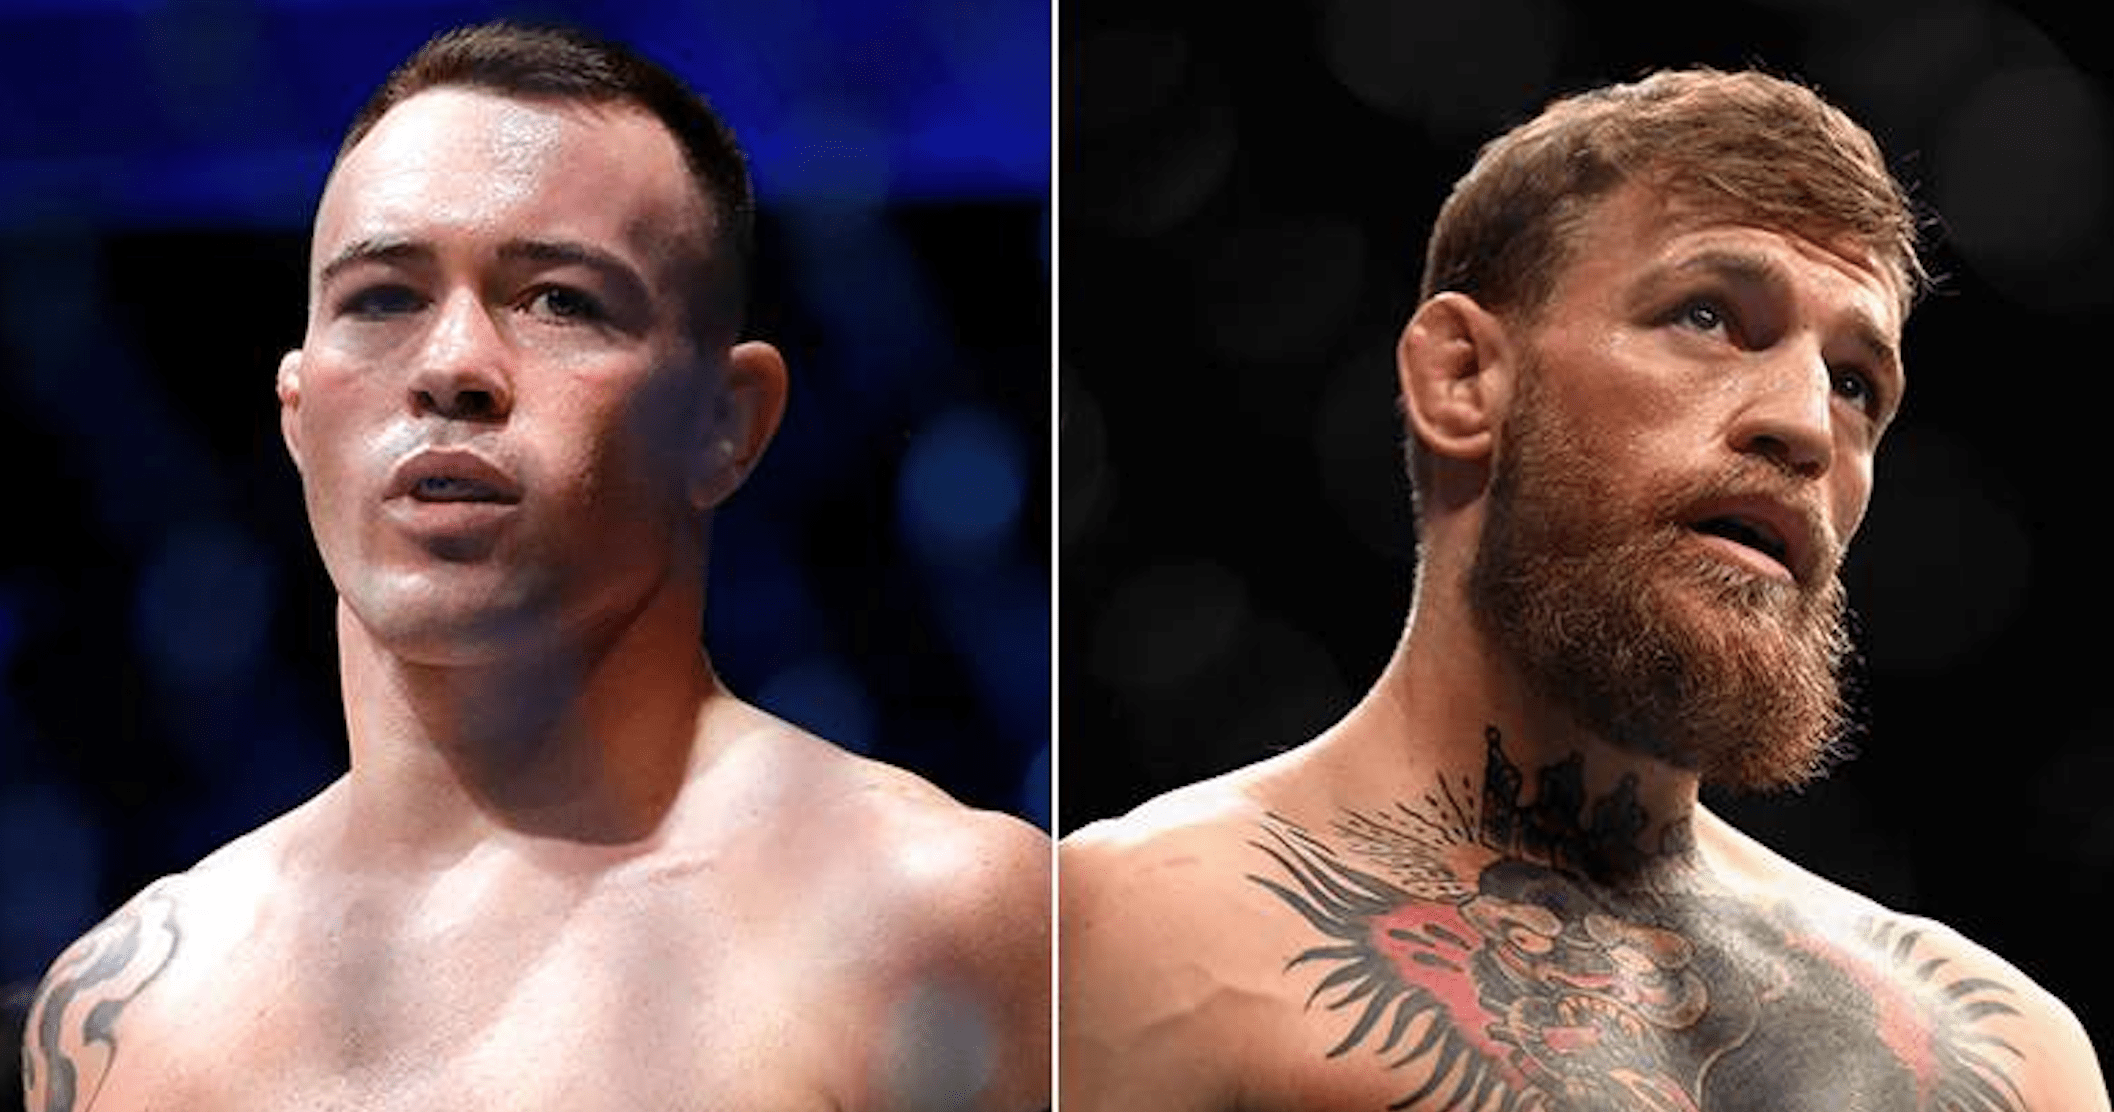 UFC: Colby Covington Hits Out At ‘Washed Up’ Conor McGregor